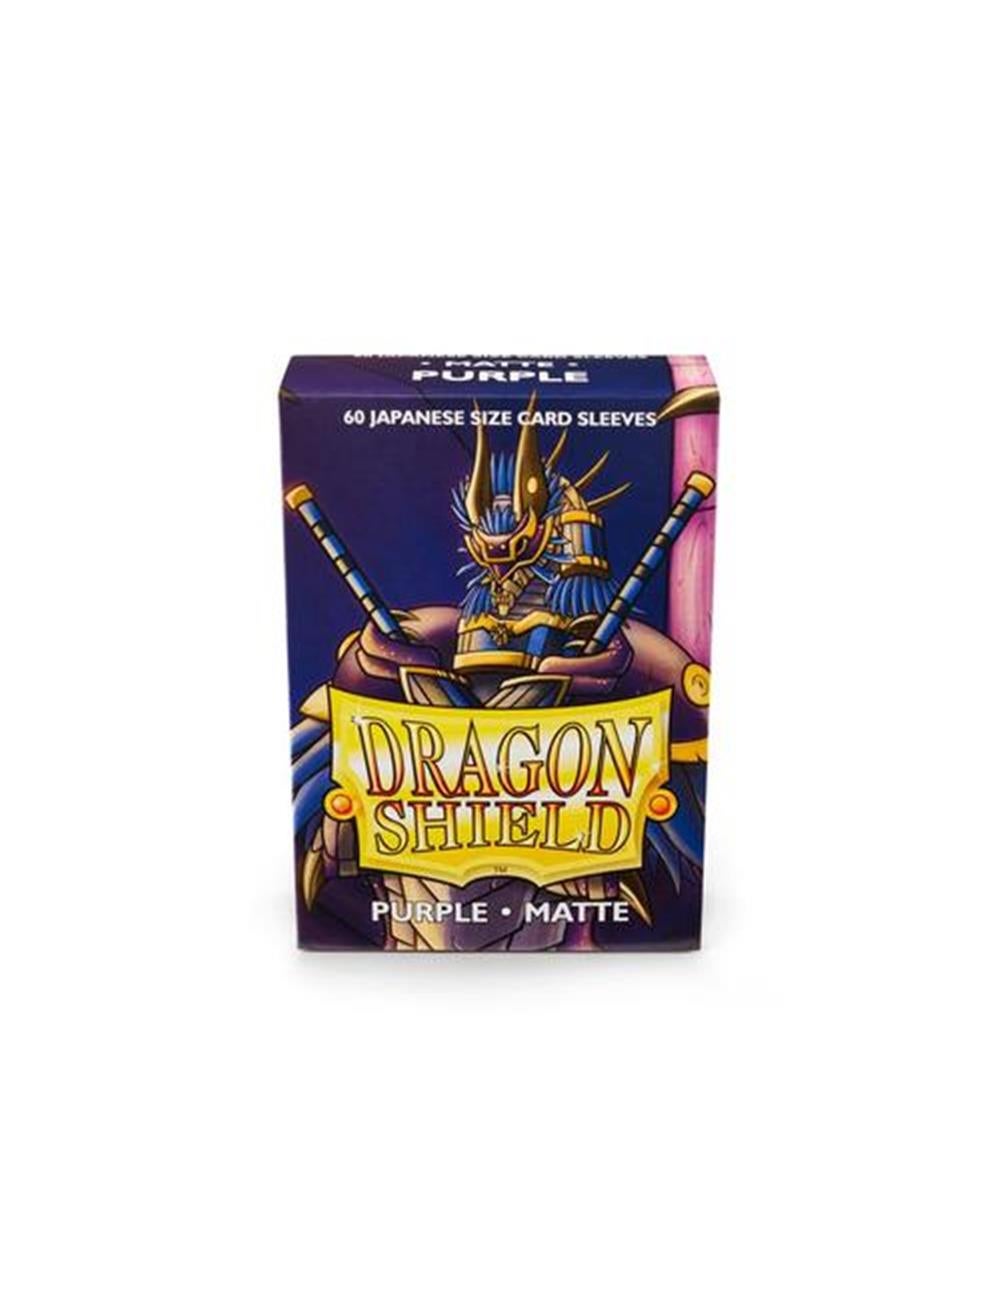 Dragon Shield Japanese Size Card Sleeves Matte Gold (60)